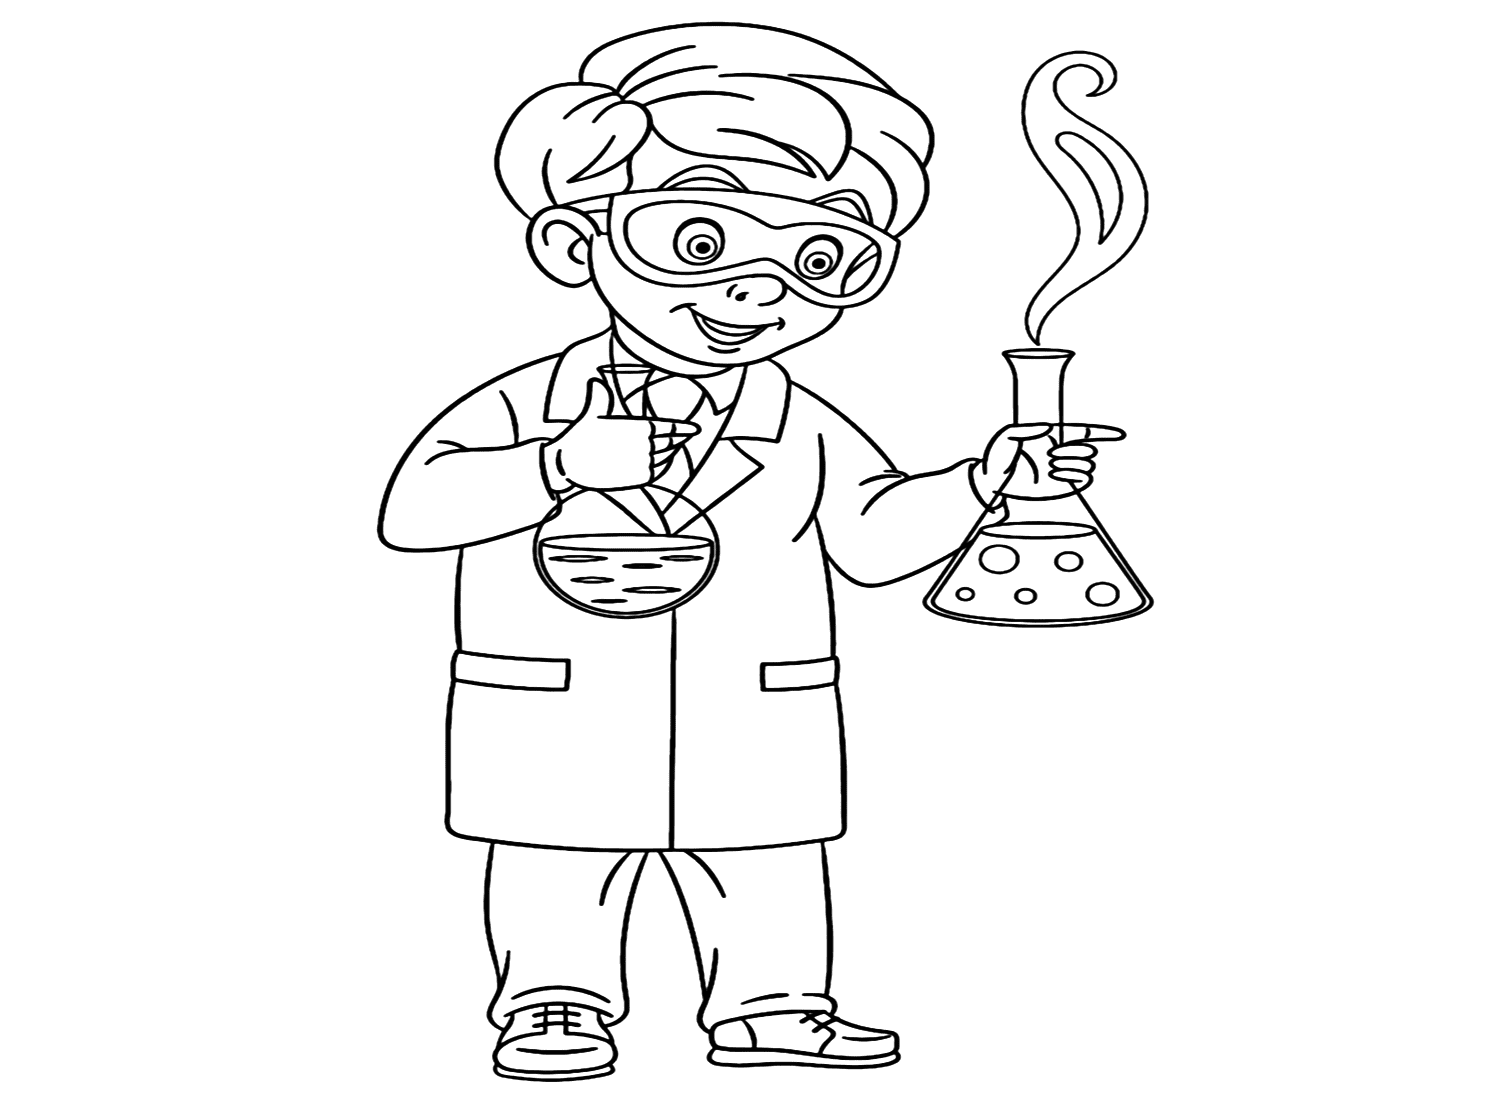 Labortary On First Day Of Coloring Page